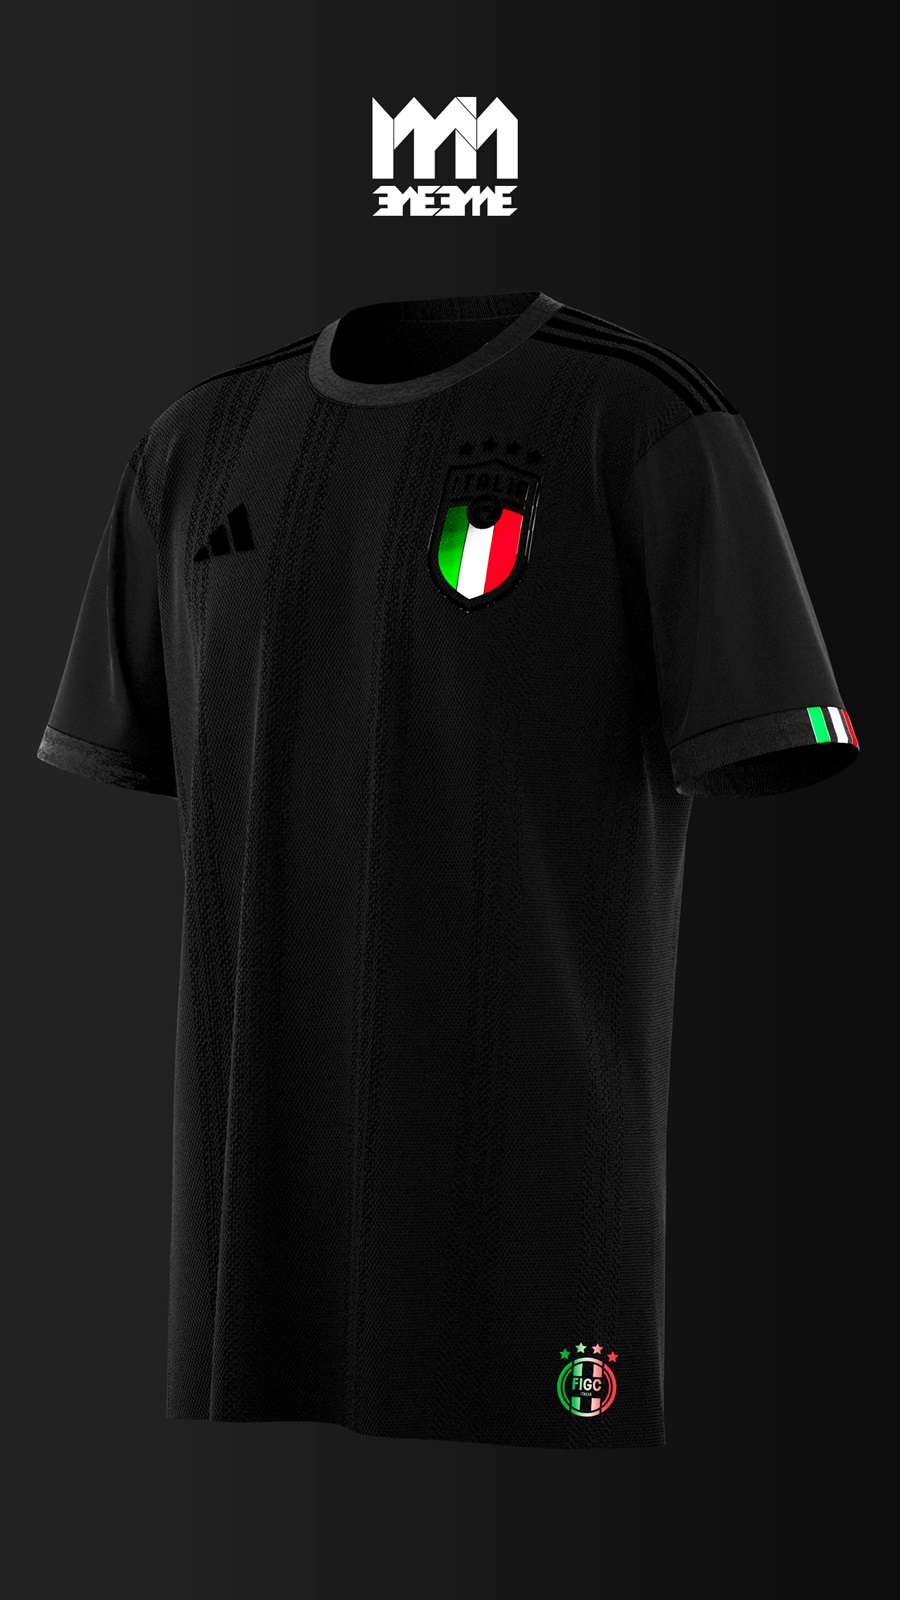 Italy X Adidas  Home & Away concepts on Behance